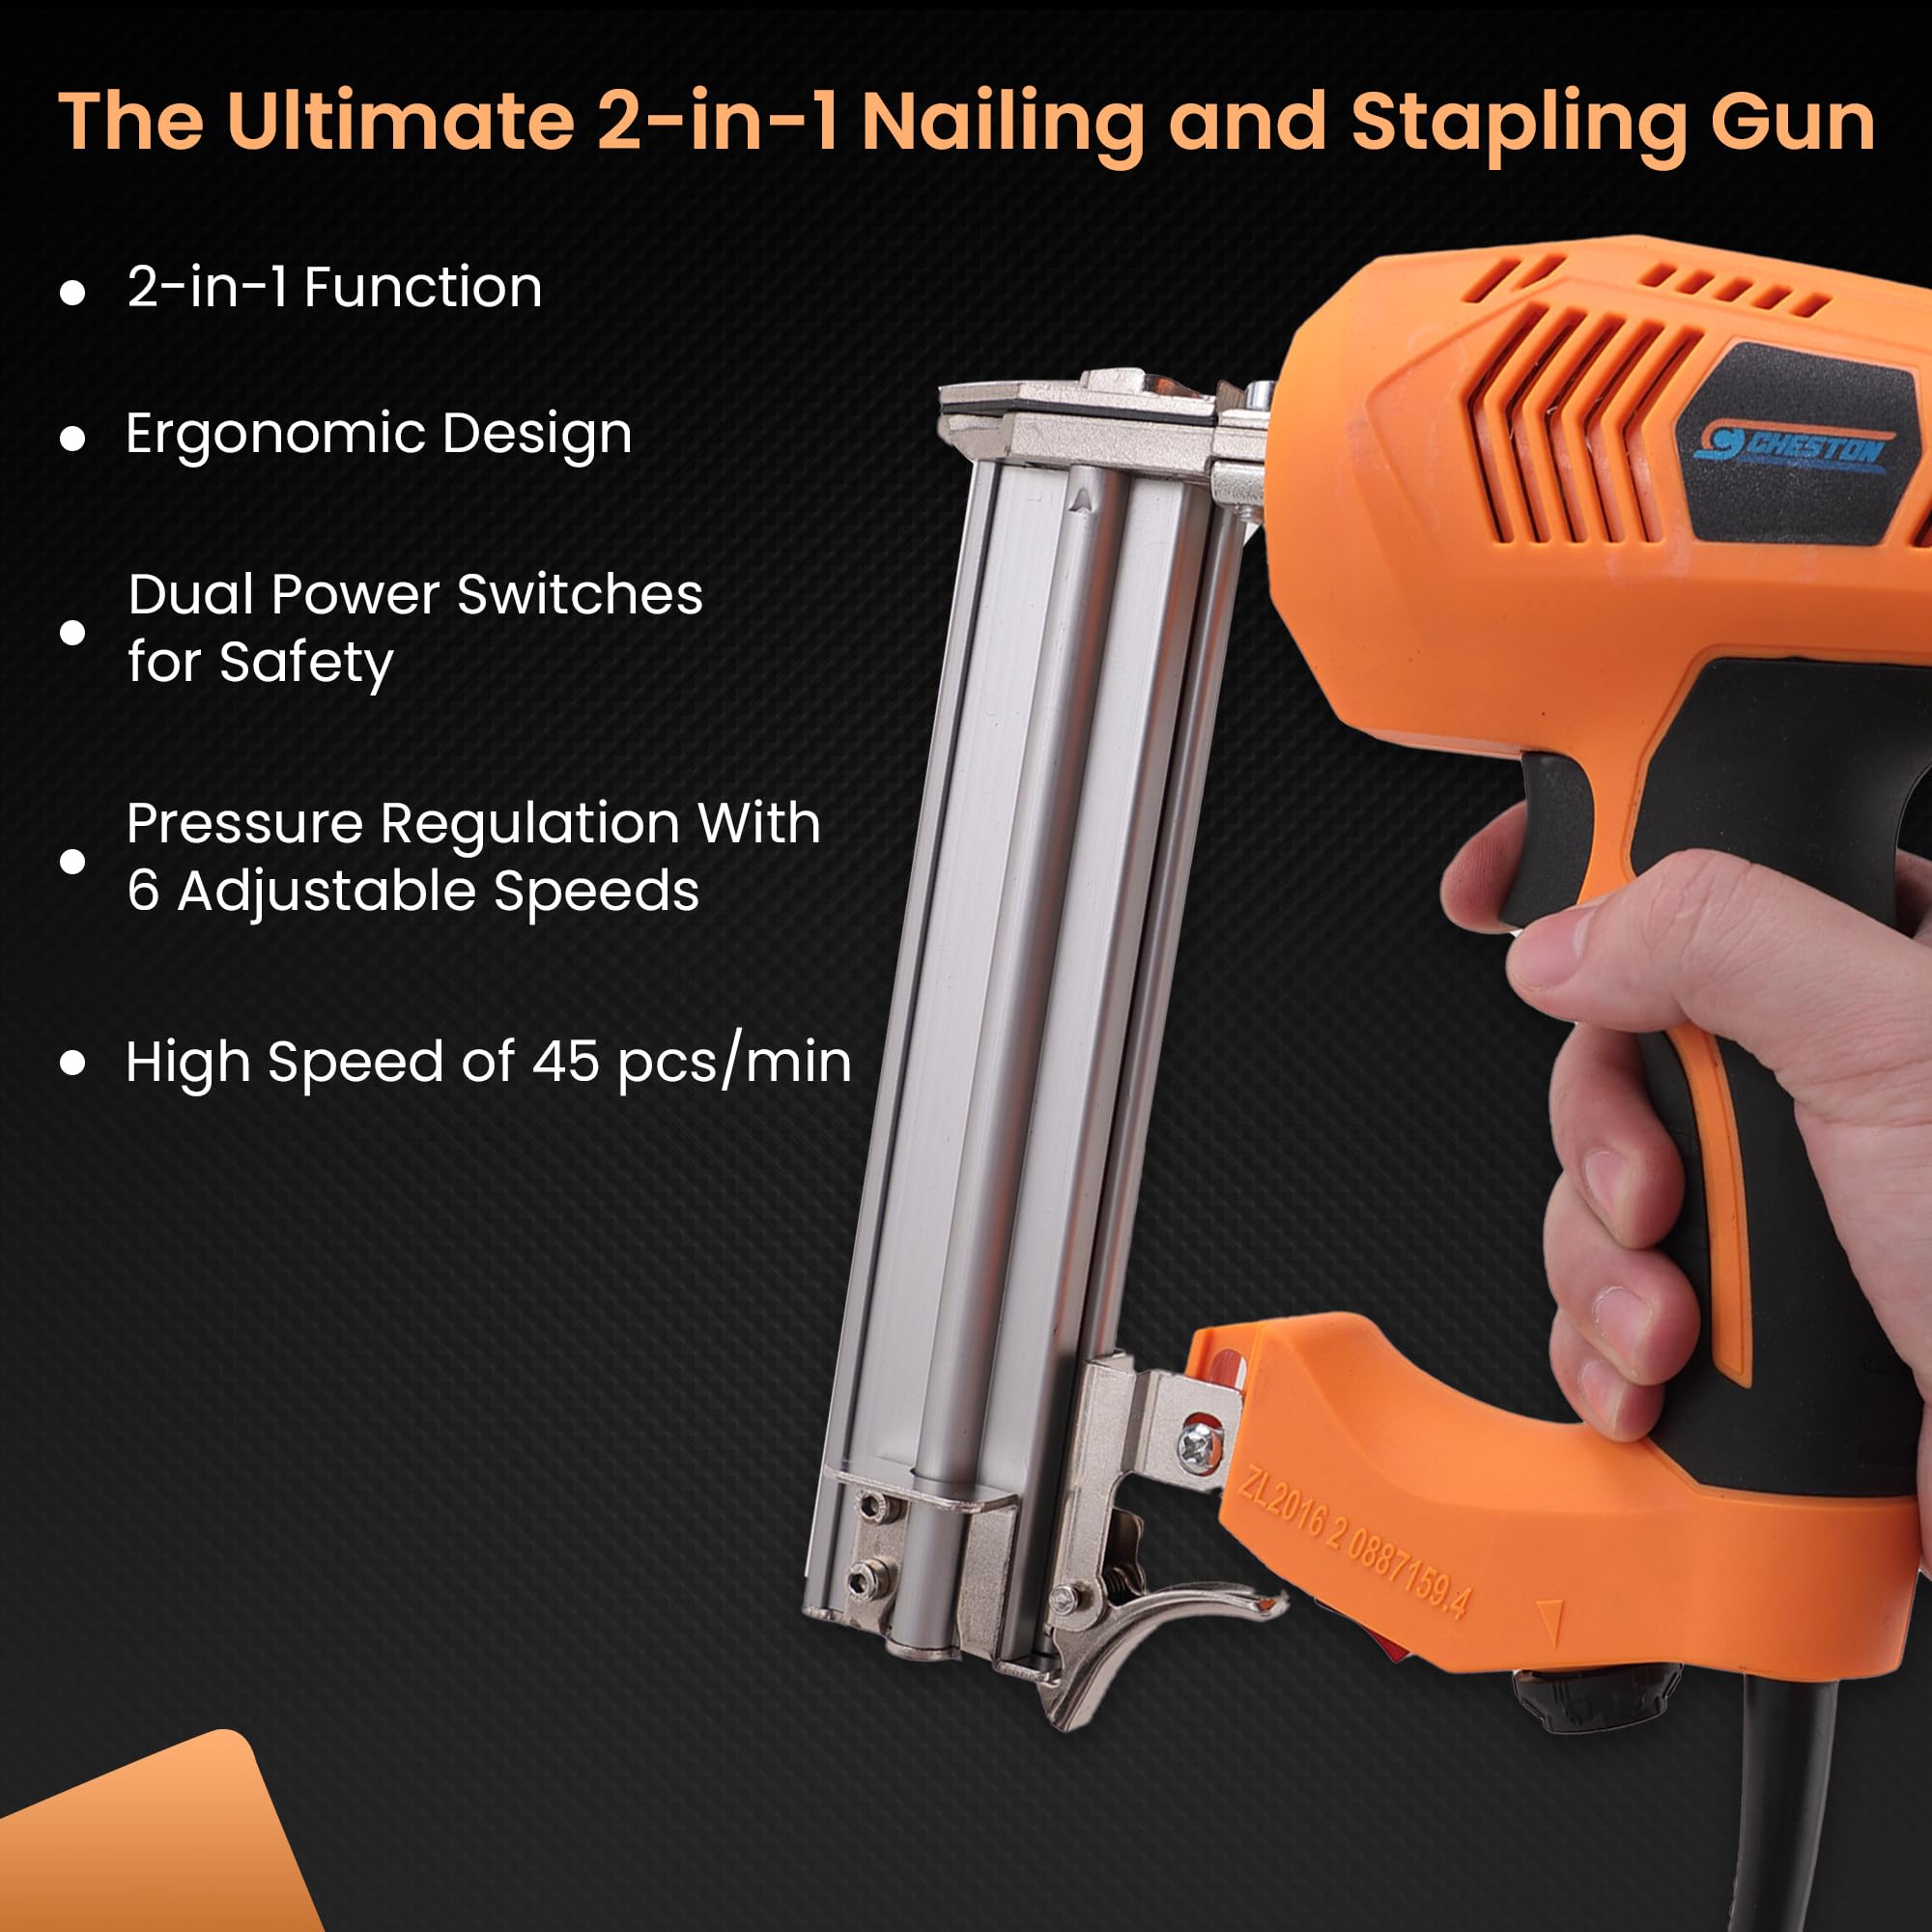 INGCO 3 in 1 Staple Nail Steel Gun Kit with 600 Staples, Manual Staple Gun  for Upholstery, Fixing Material, Decoration, Carpentry, Furniture :  Amazon.in: Home Improvement